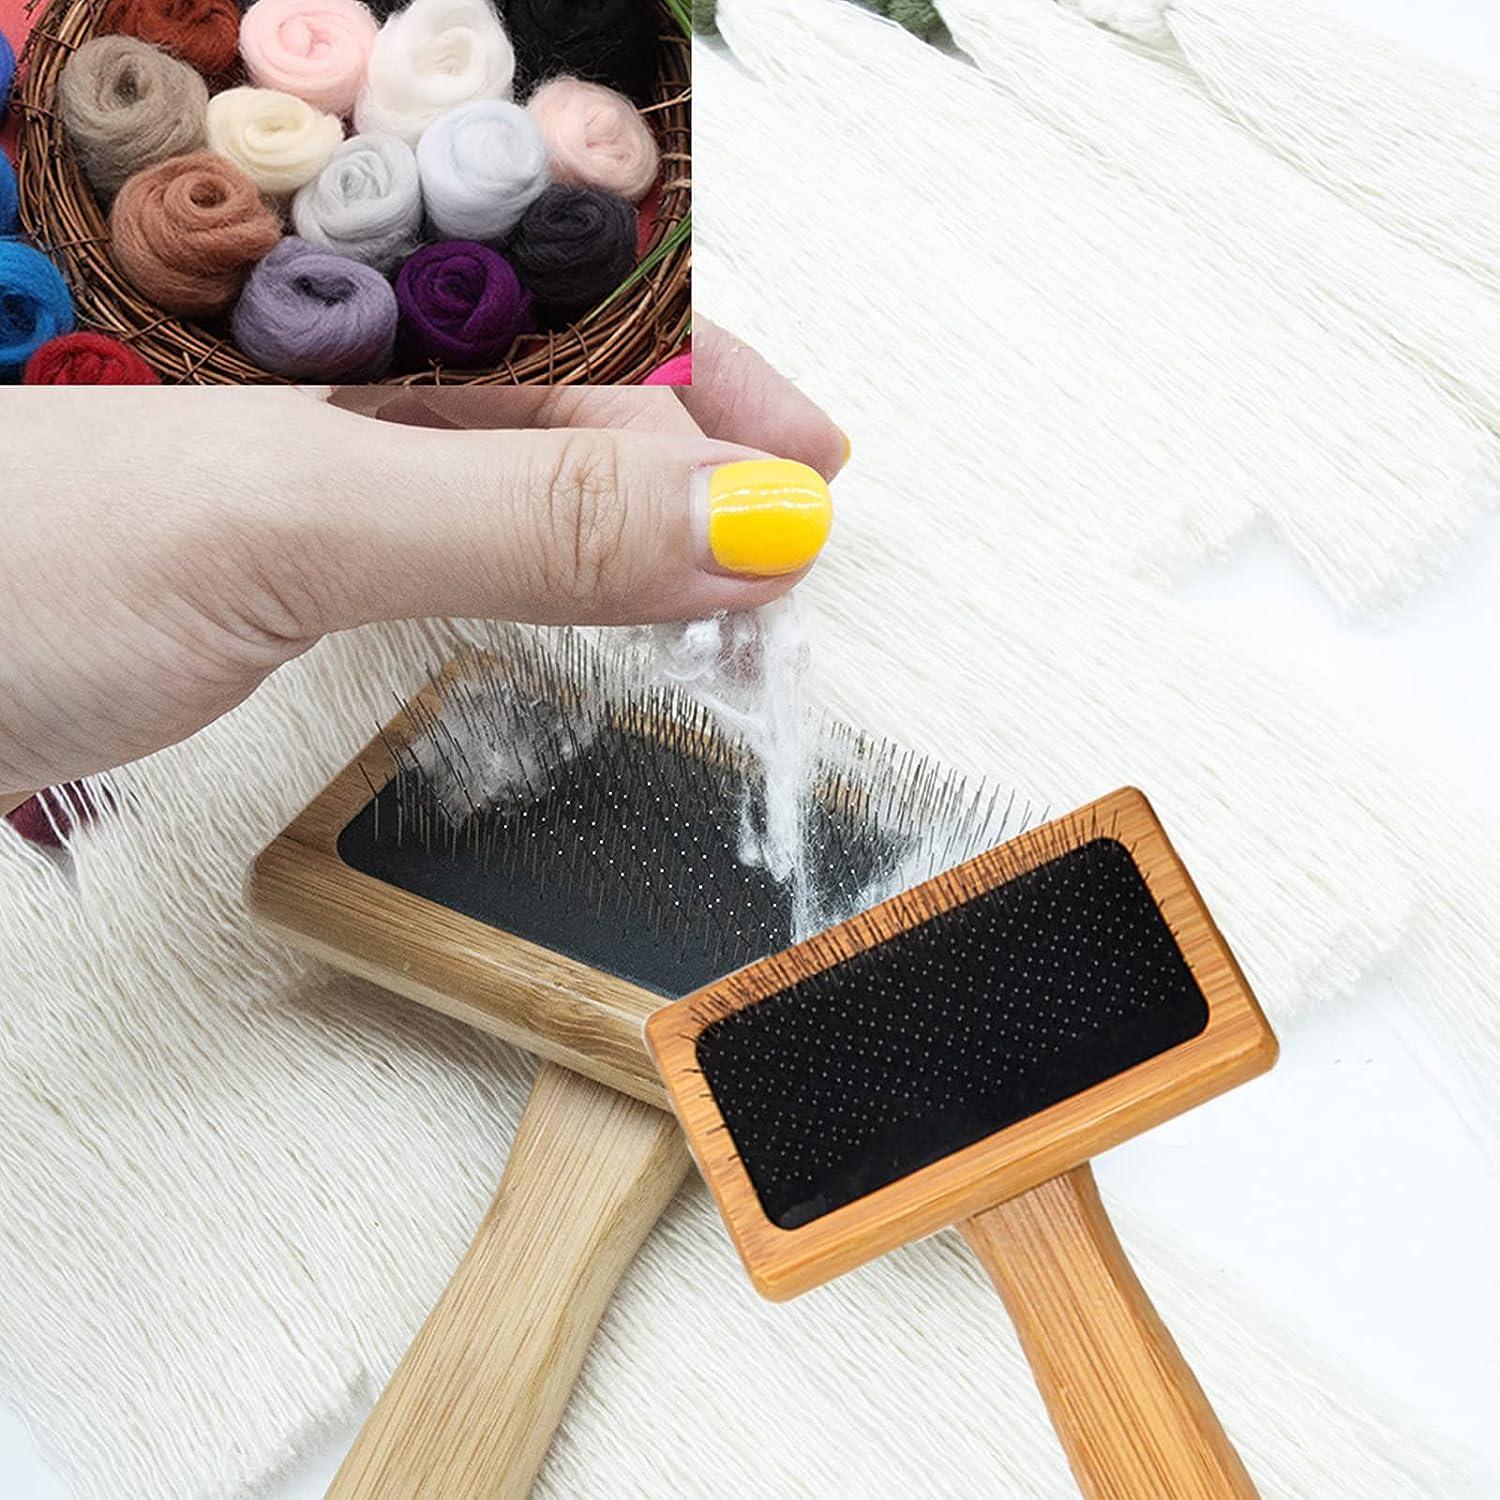 2 Pcs Wool Carders Needle Felting Brush Hand Carders for Wool